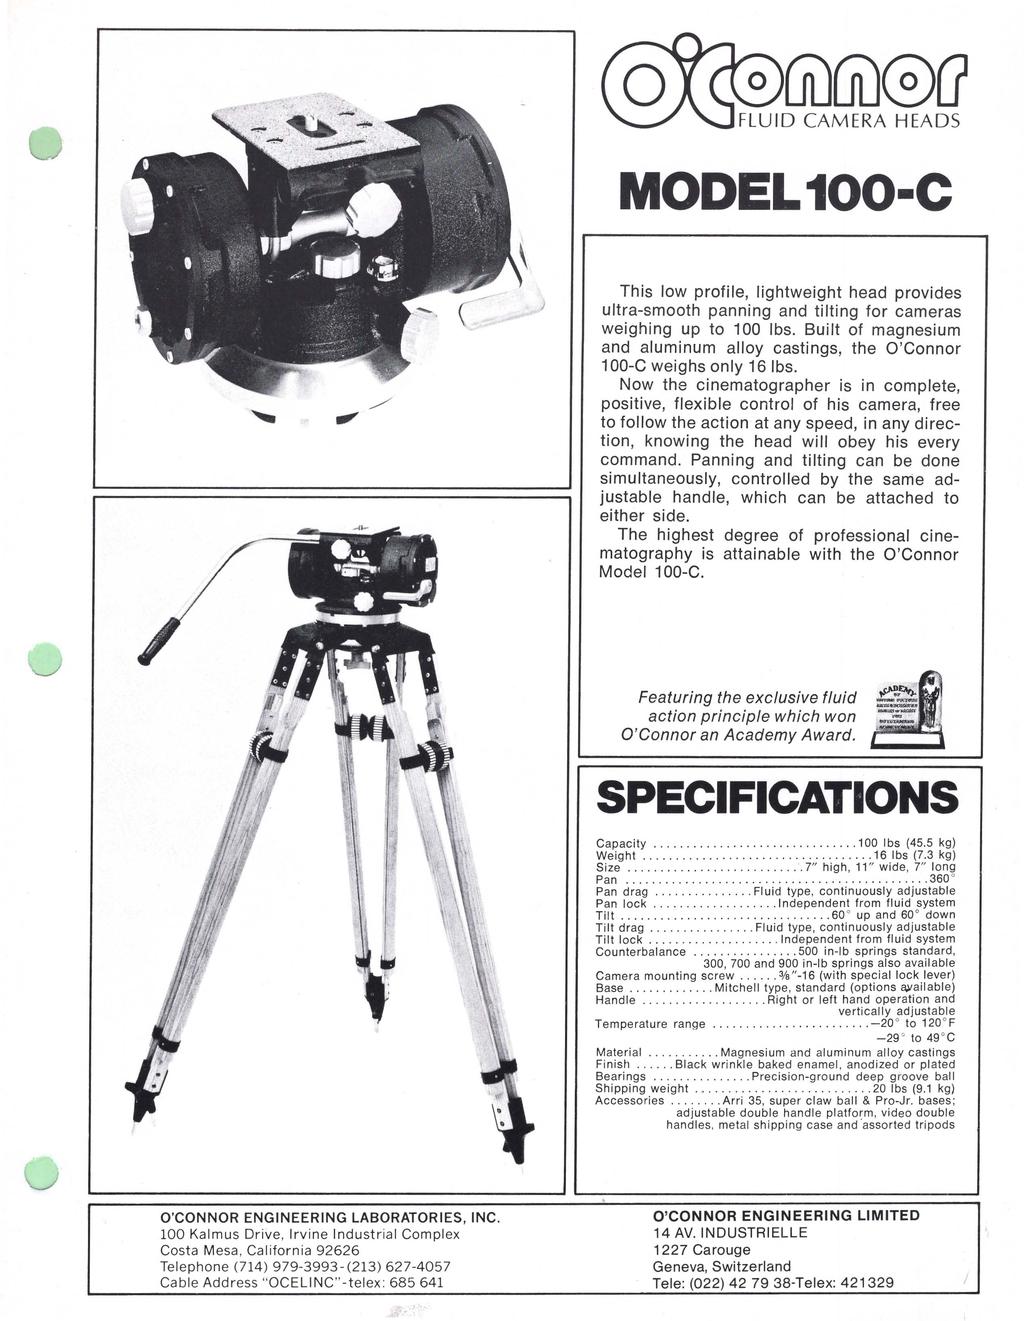 MODEL100-C This low profile, lightweight head provides ultra-smooth panning and tilting for cameras weighing up to 100 Ibs.